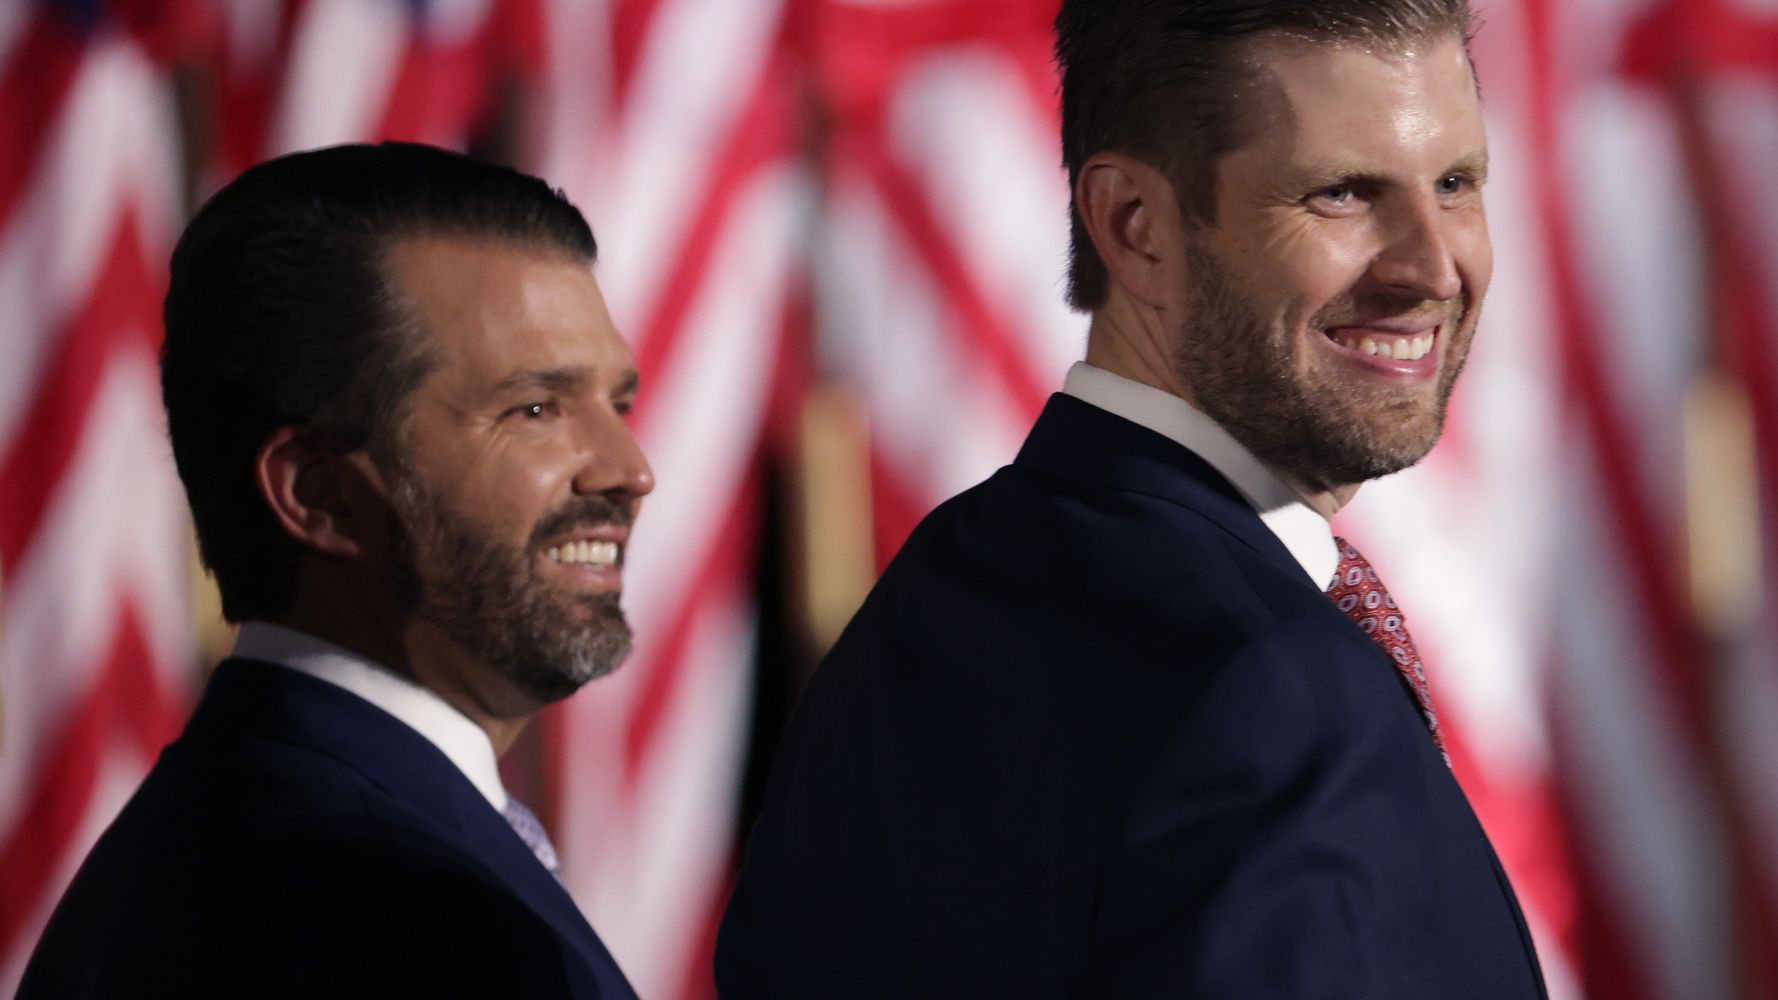 Donald Trump's Adult Sons Spreading Election Disinformation To Discredit Vote